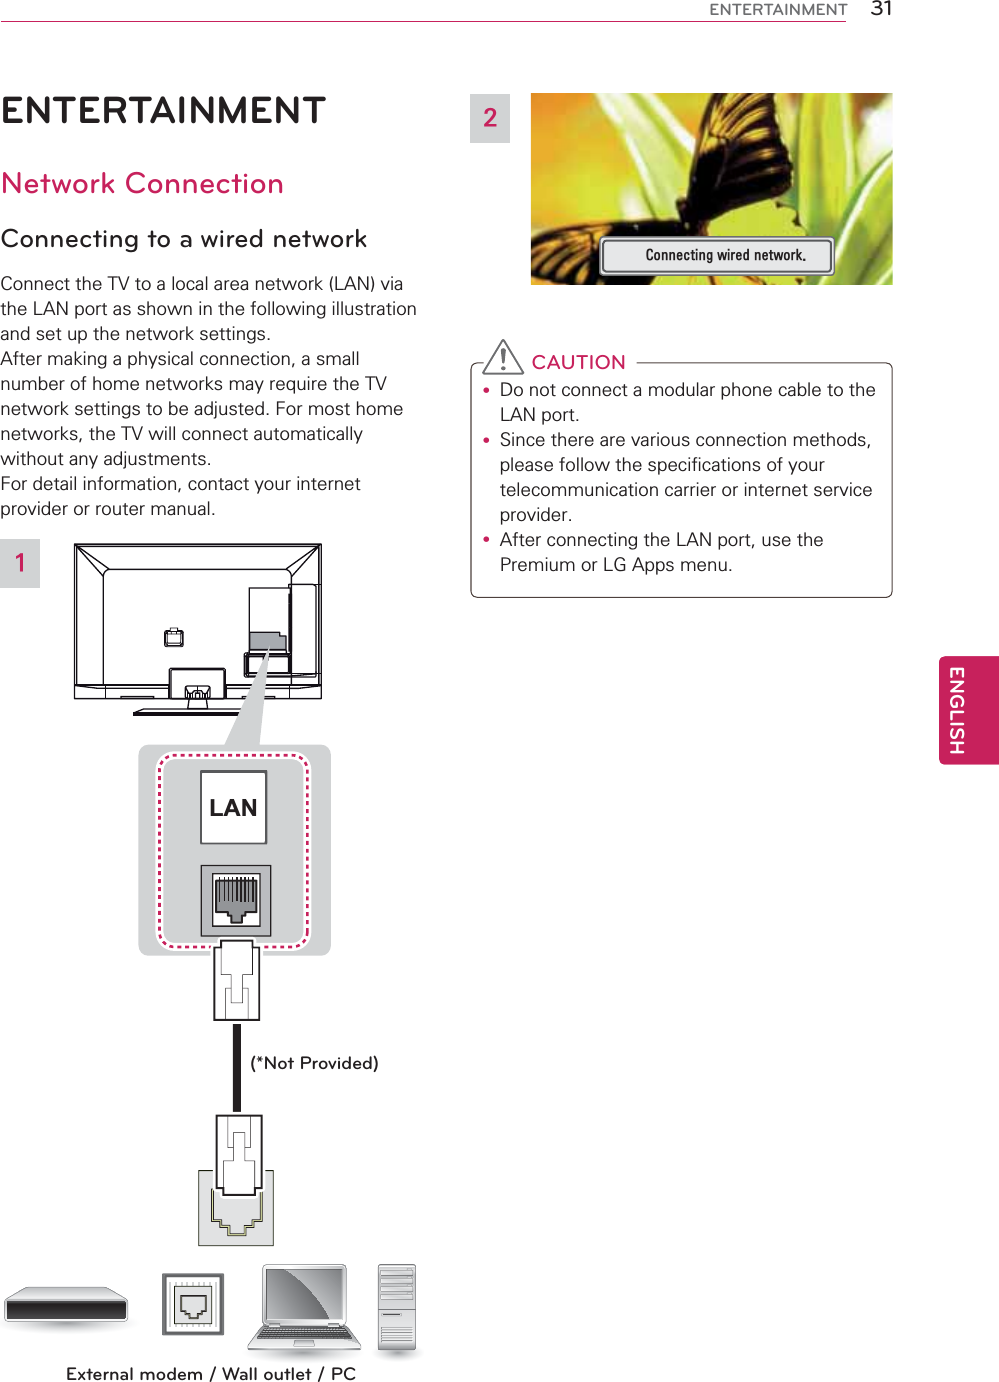 31ENGENGLISHENTERTAINMENTENTERTAINMENTNetwork ConnectionConnecting to a wired networkConnect the TV to a local area network (LAN) via the LAN port as shown in the following illustration and set up the network settings.After making a physical connection, a small number of home networks may require the TV network settings to be adjusted. For most home networks, the TV will connect automatically without any adjustments. For detail information, contact your internet provider or router manual.LANExternal modem / Wall outlet / PC(*Not Provided)1&amp;RQQHFWLQJZLUHGQHWZRUN2 CAUTIONy Do not connect a modular phone cable to the LAN port.y Since there are various connection methods, please follow the specifications of your telecommunication carrier or internet service provider.y After connecting the LAN port, use the Premium or LG Apps menu.  